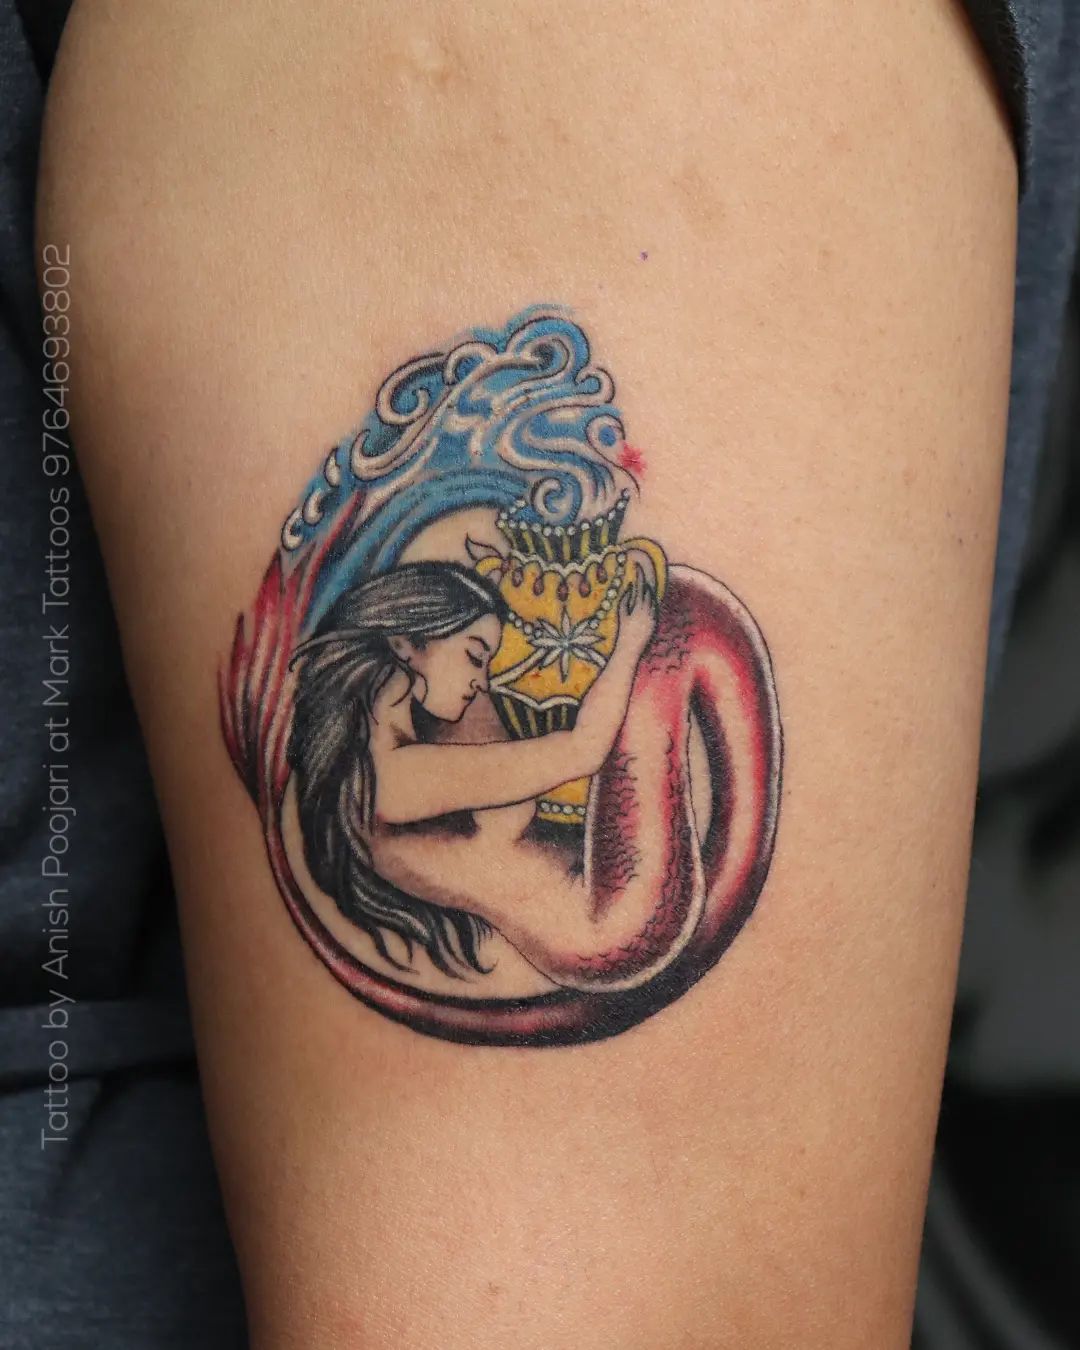 Mermaid tattoos mean you are free as the sea and you know what? Every Aquarius person loves being free. They can even stop talking to someone who limits their freedom. Since mermaids symbolize this concept, you should get this tattoo, for sure. What are you waiting for?